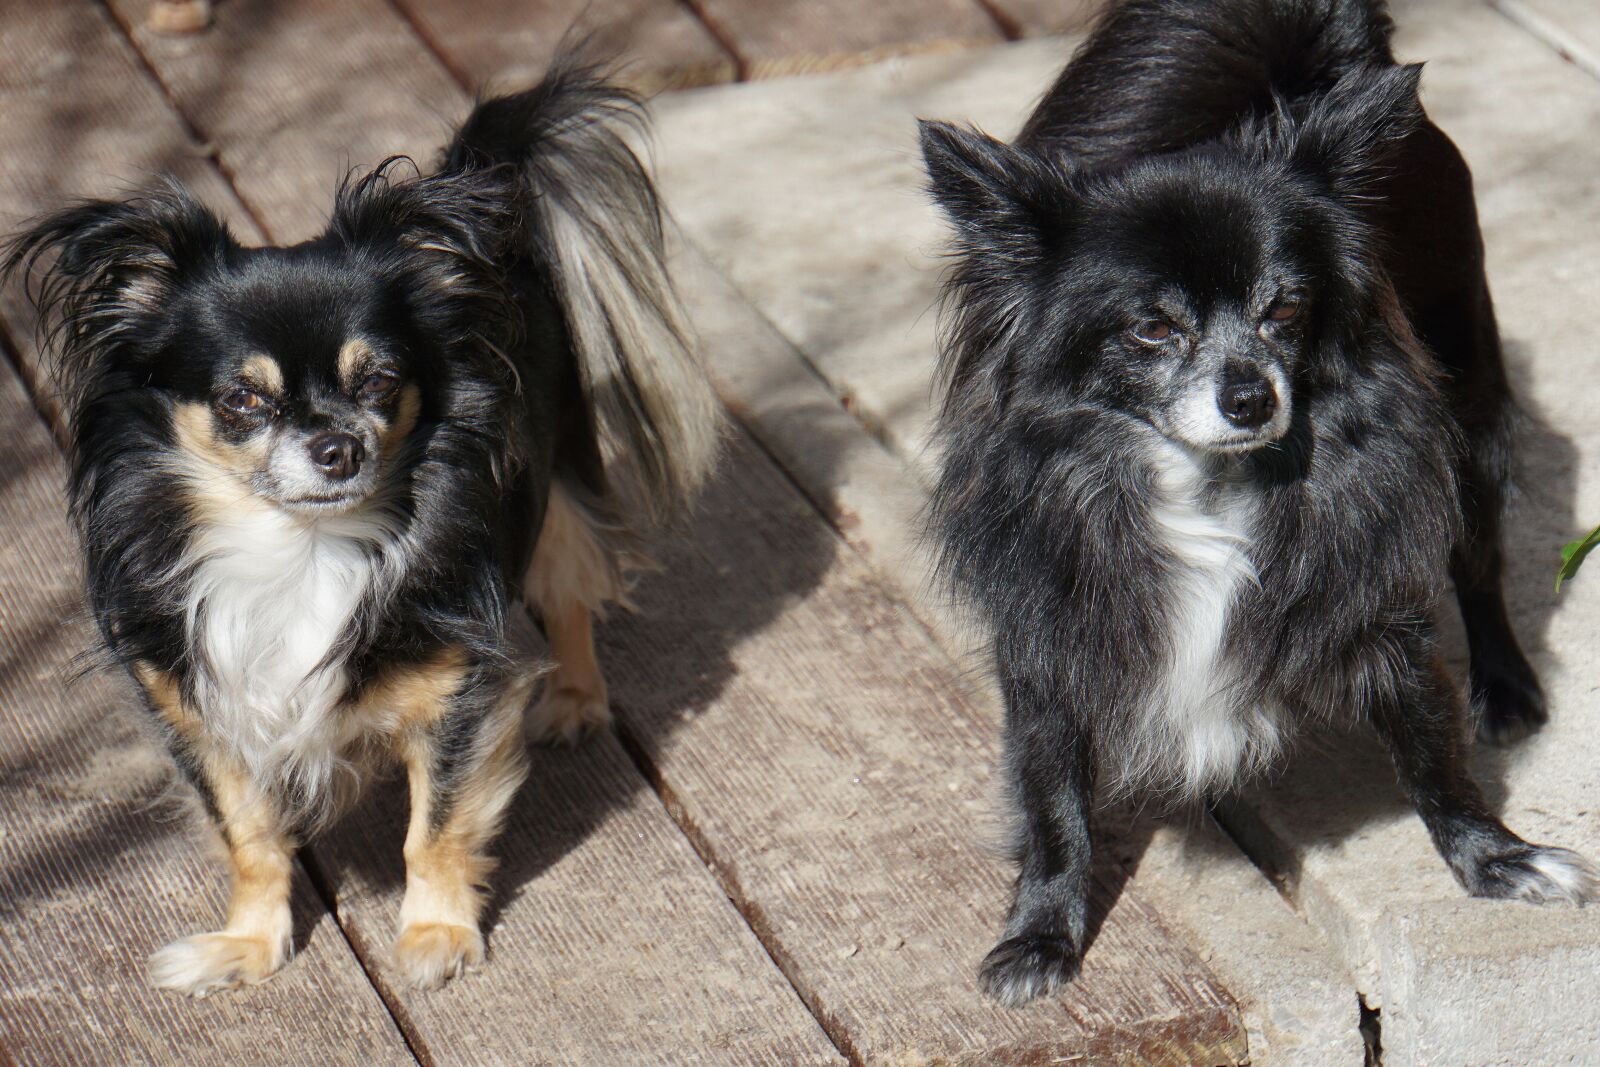 Sony a6000 sample photo. Chihuahua, double pack, dogs photography